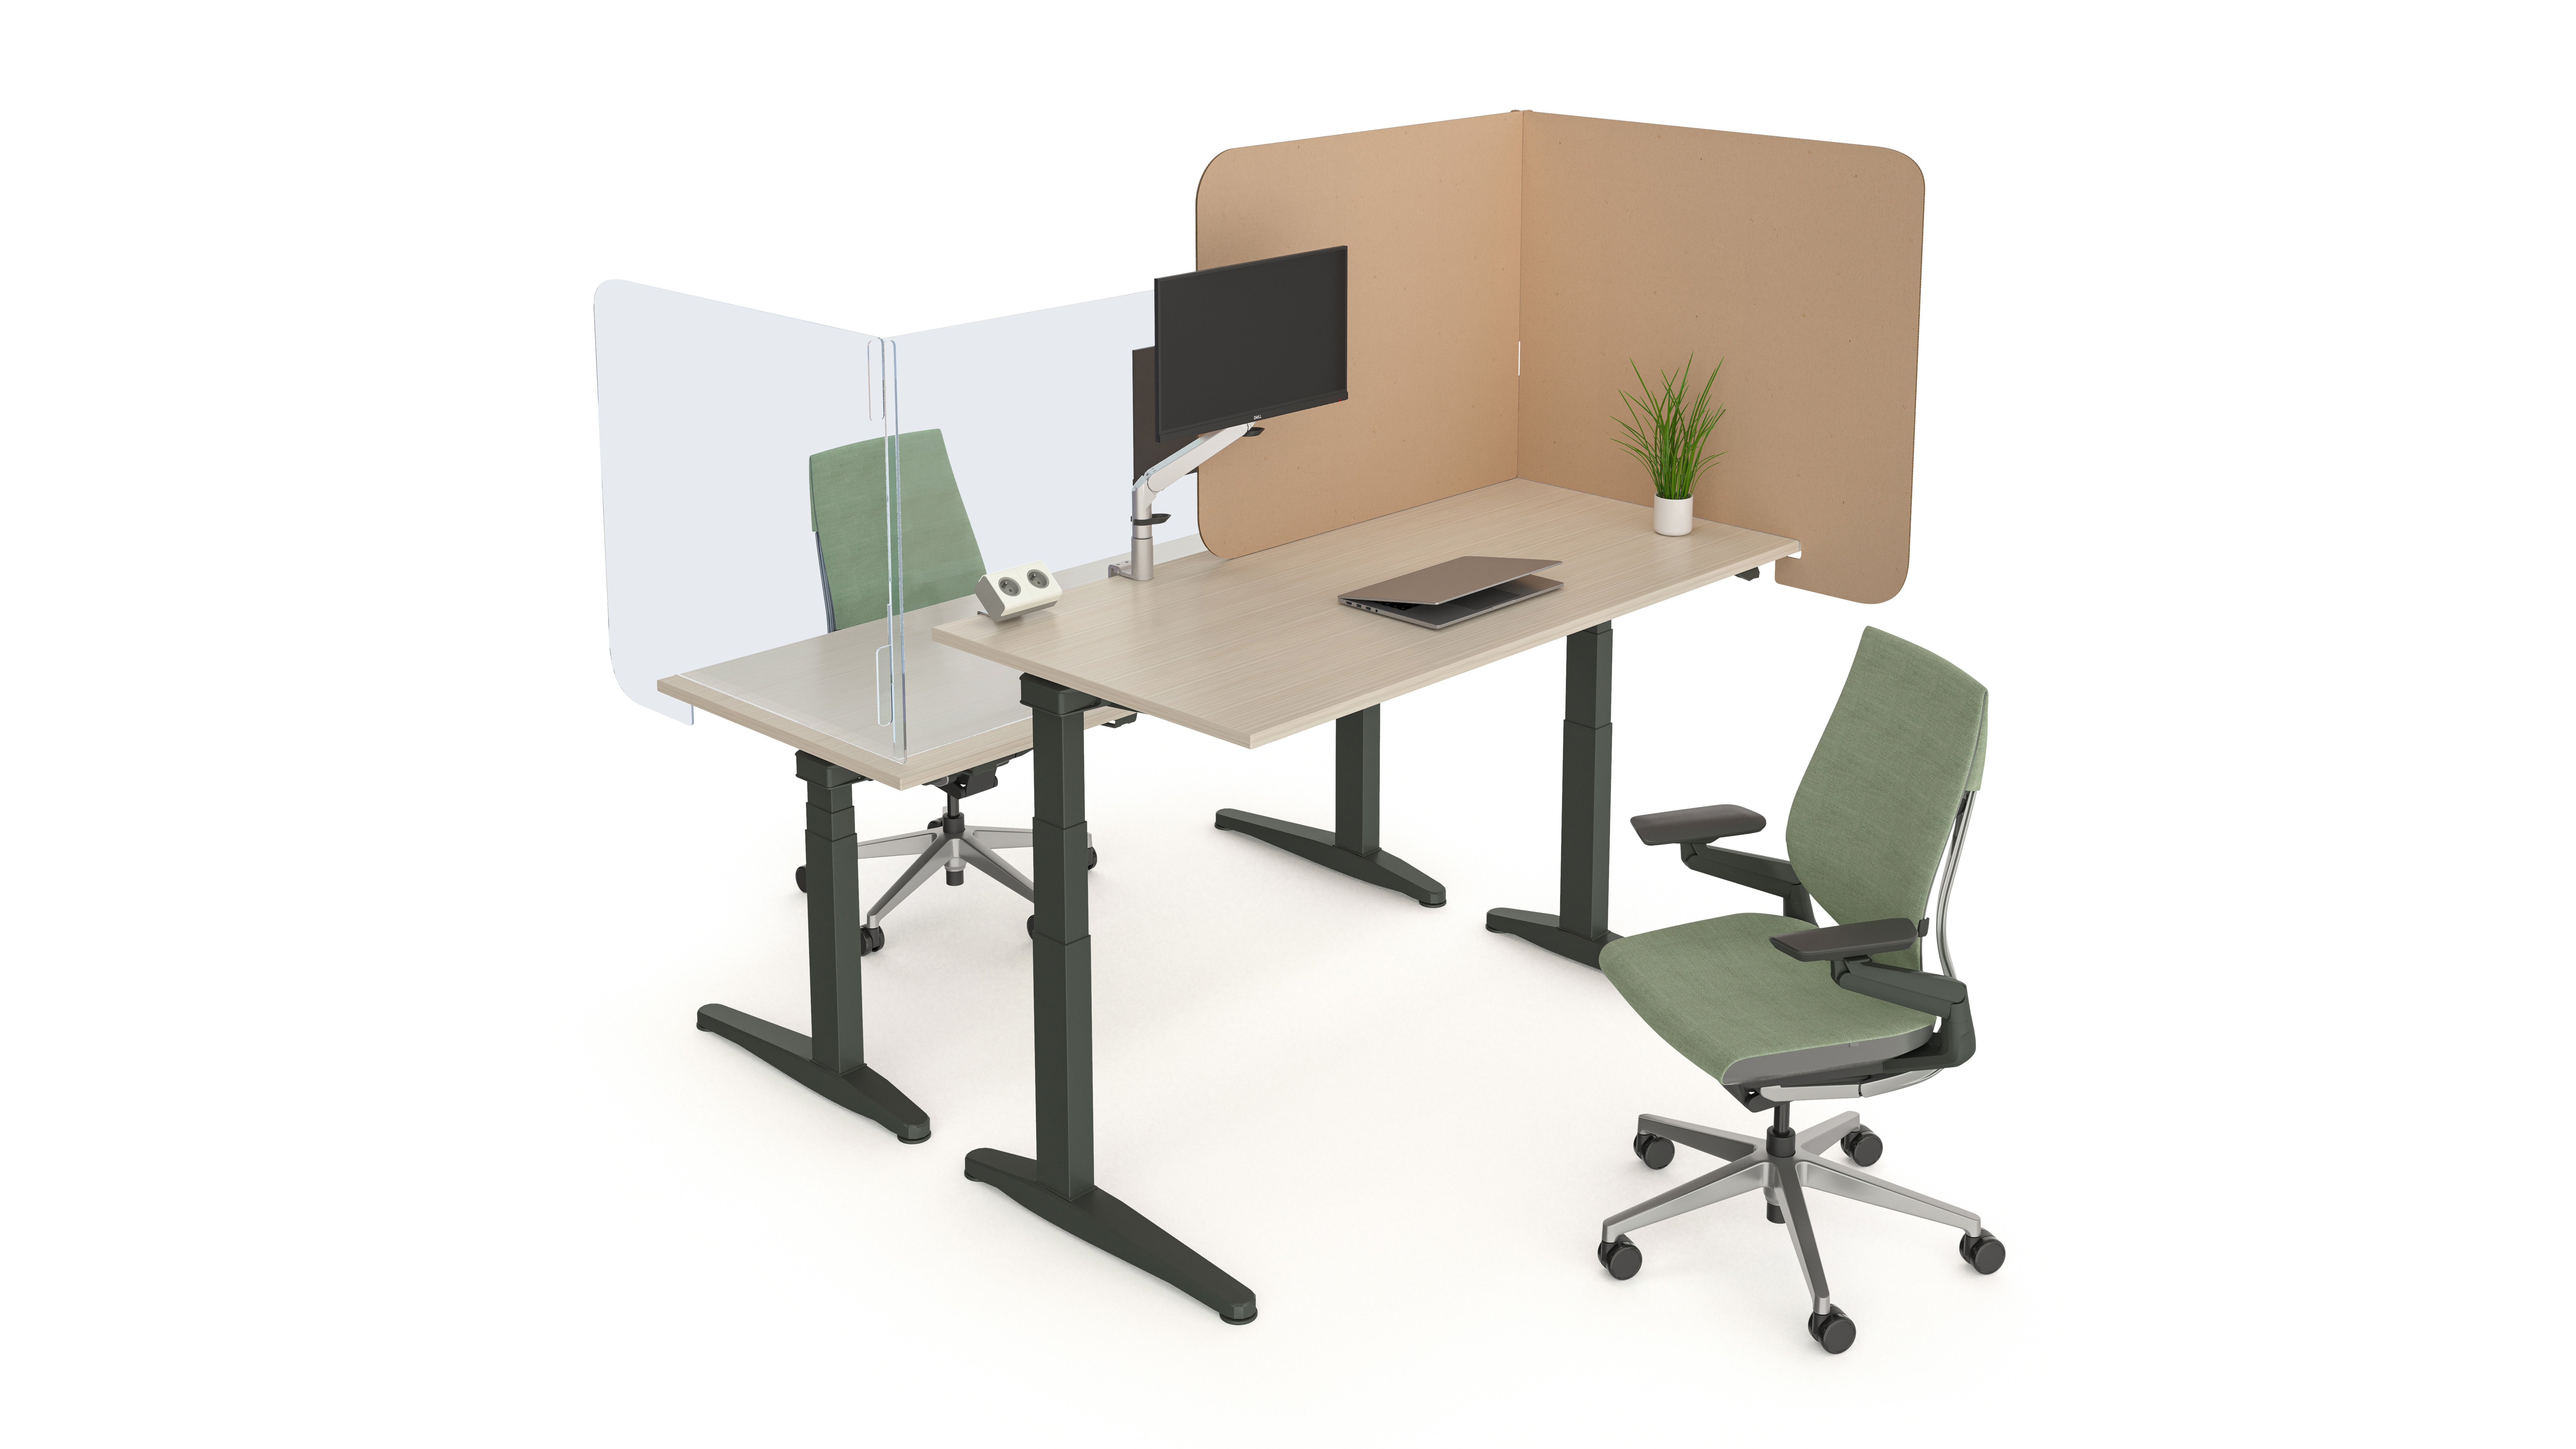 Post COVID-19 Office Furniture Solutions - Steelcase